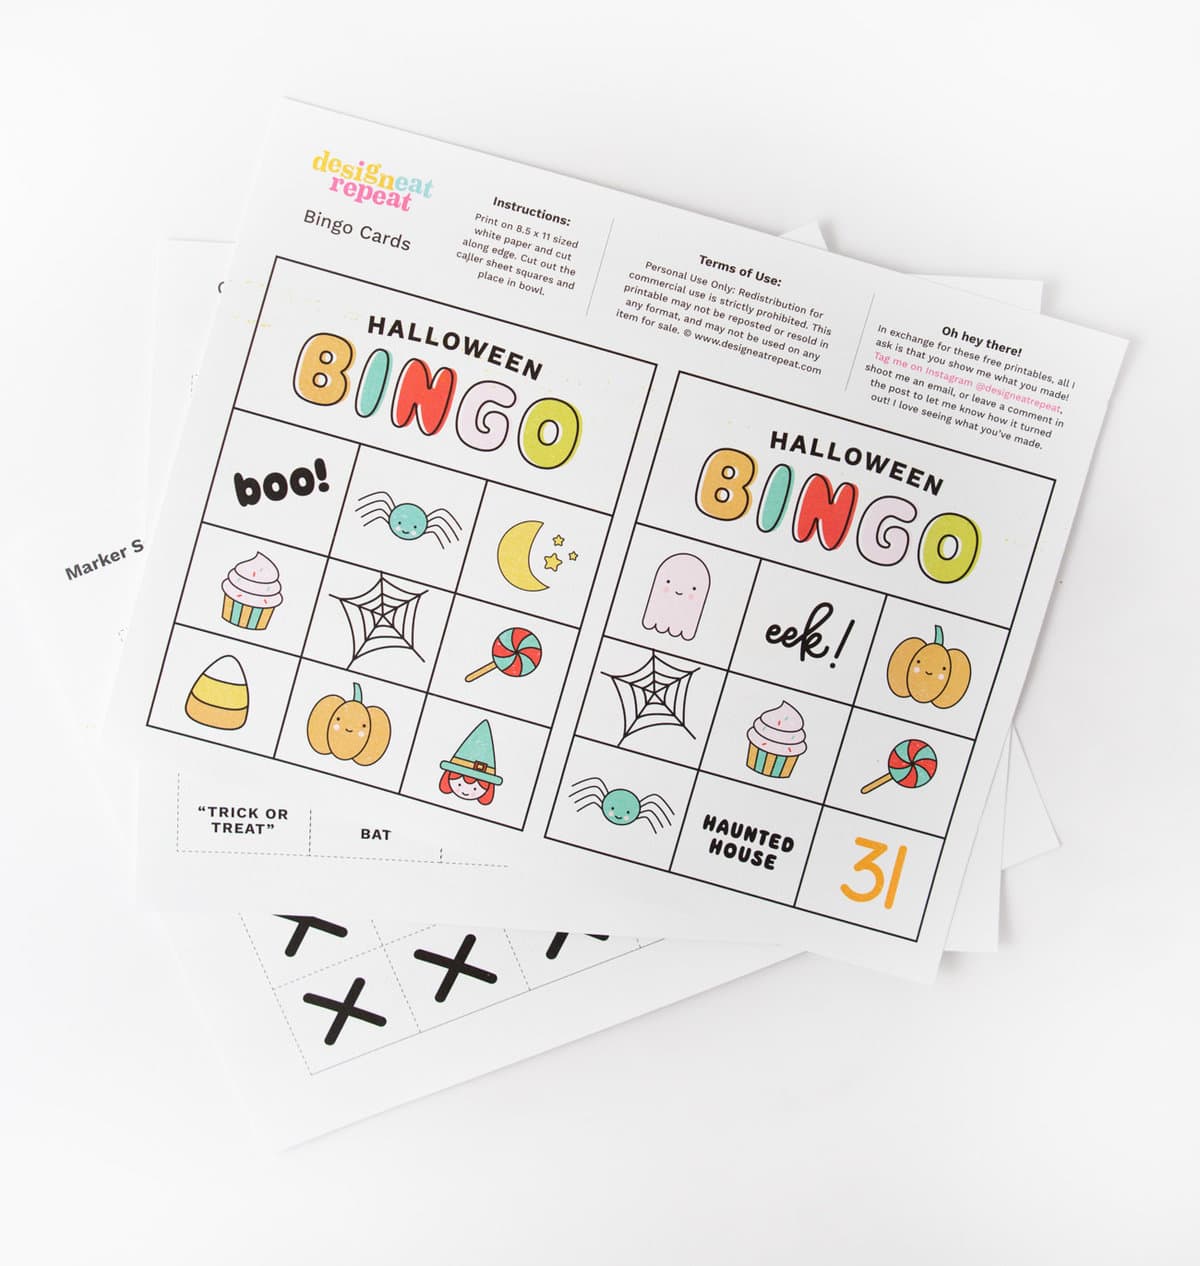 Printed pages of free printable Halloween bingo cards with icons and pictures: pumpkin, witch, lollipop, cauldron, spider, ghost